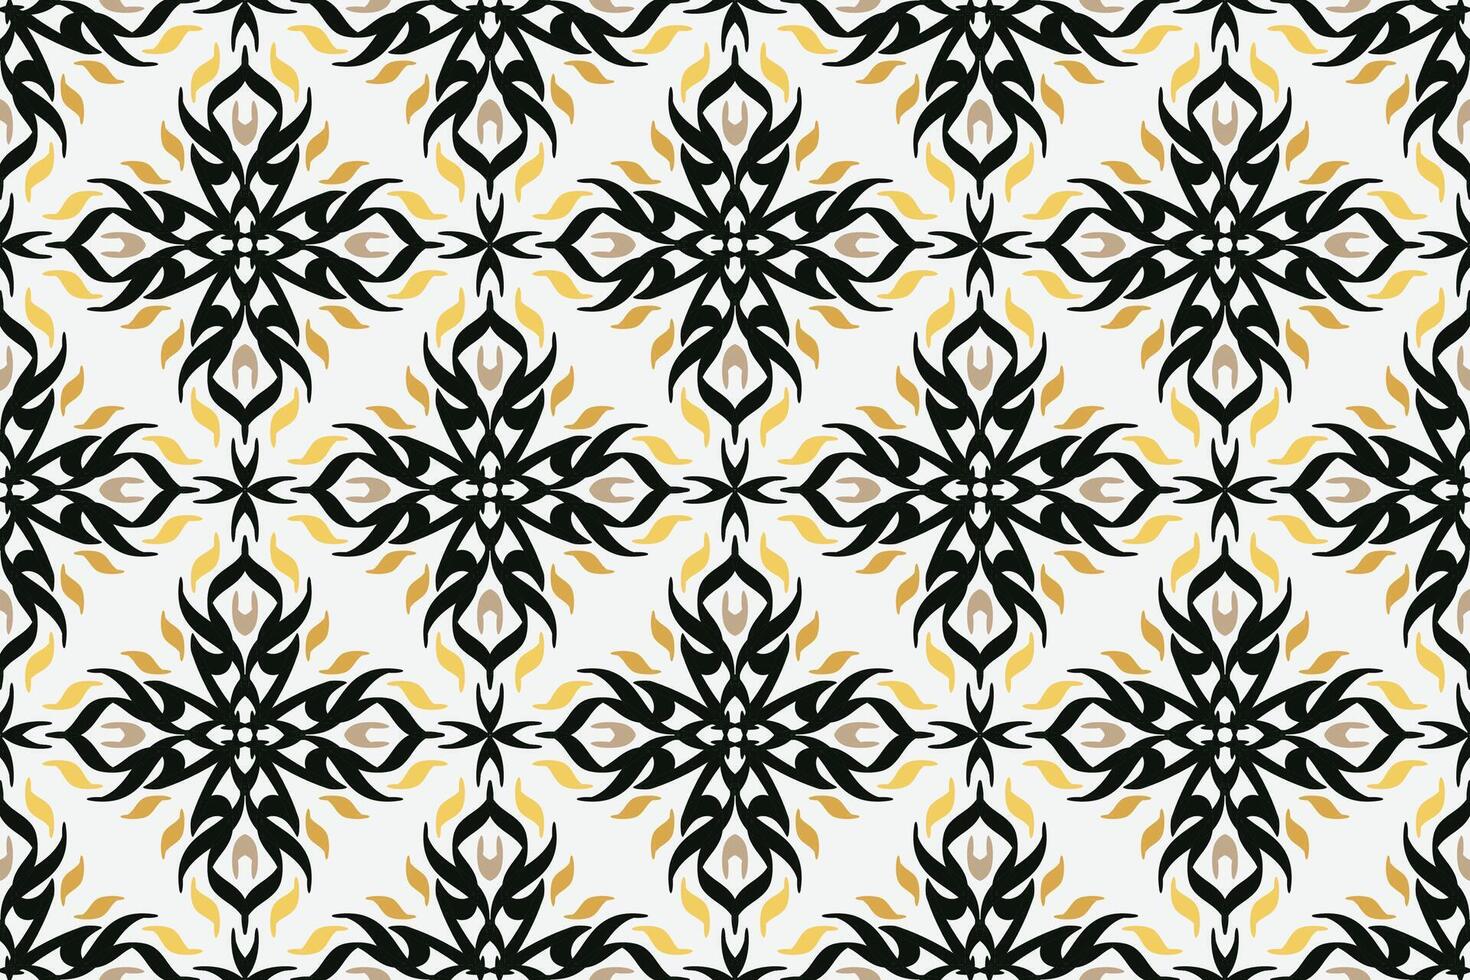 Vector seamless pattern. Modern stylish texture. Repeating geometric tiles with vintage style